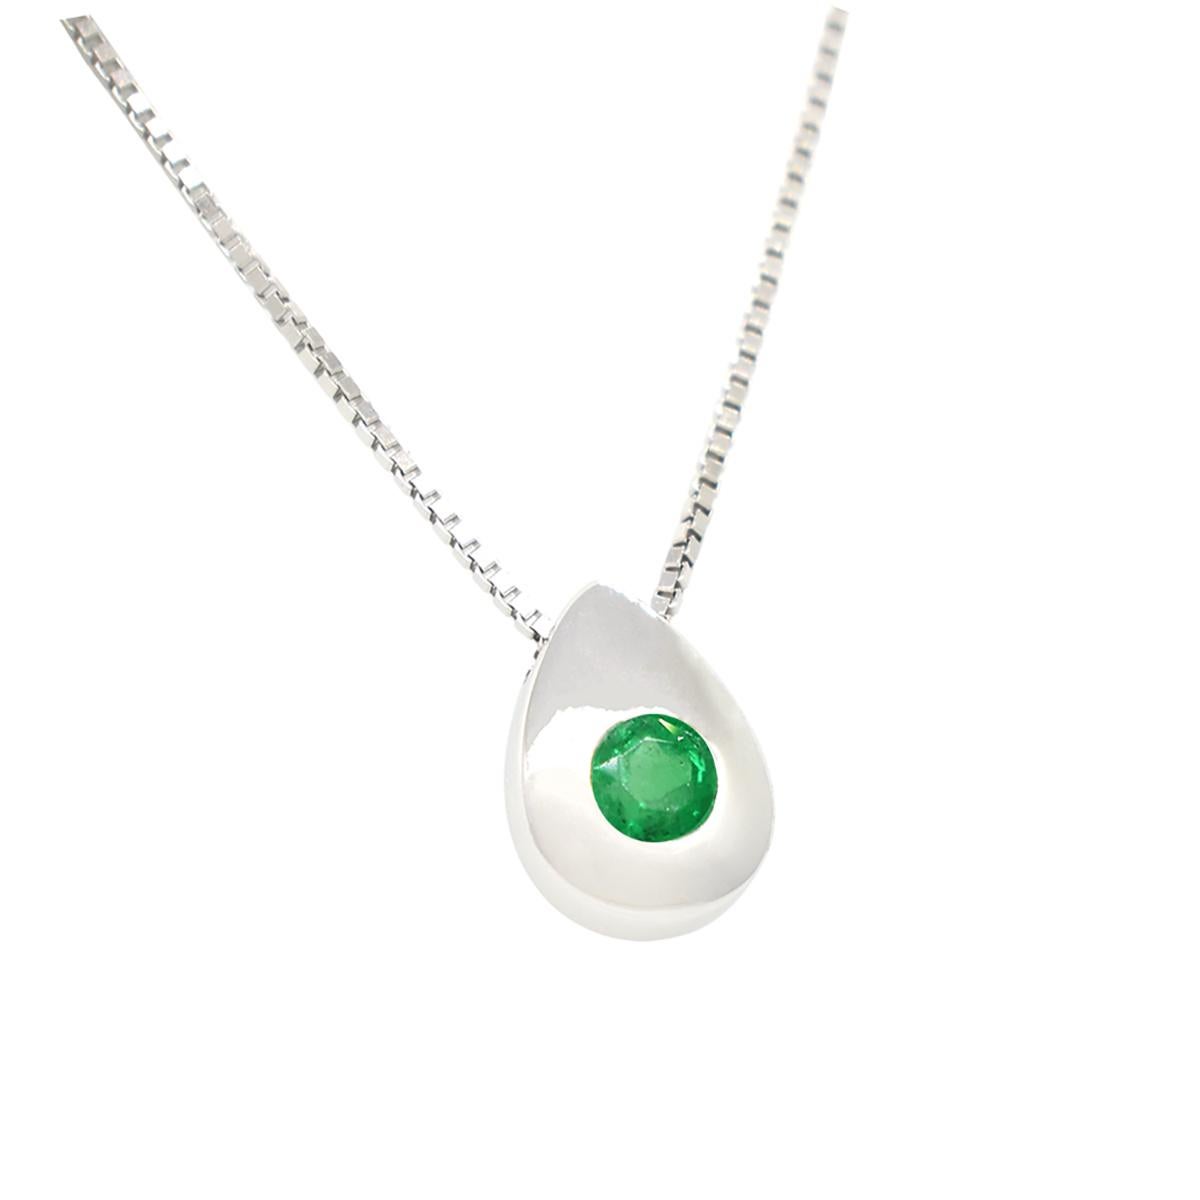 This beautiful emerald necklace is made in 18K white gold with a stunning round cut emerald with intense and deep green color. The emerald is perfectly set inside a smooth teardrop shape necklace with a brilliant high polished ending around the